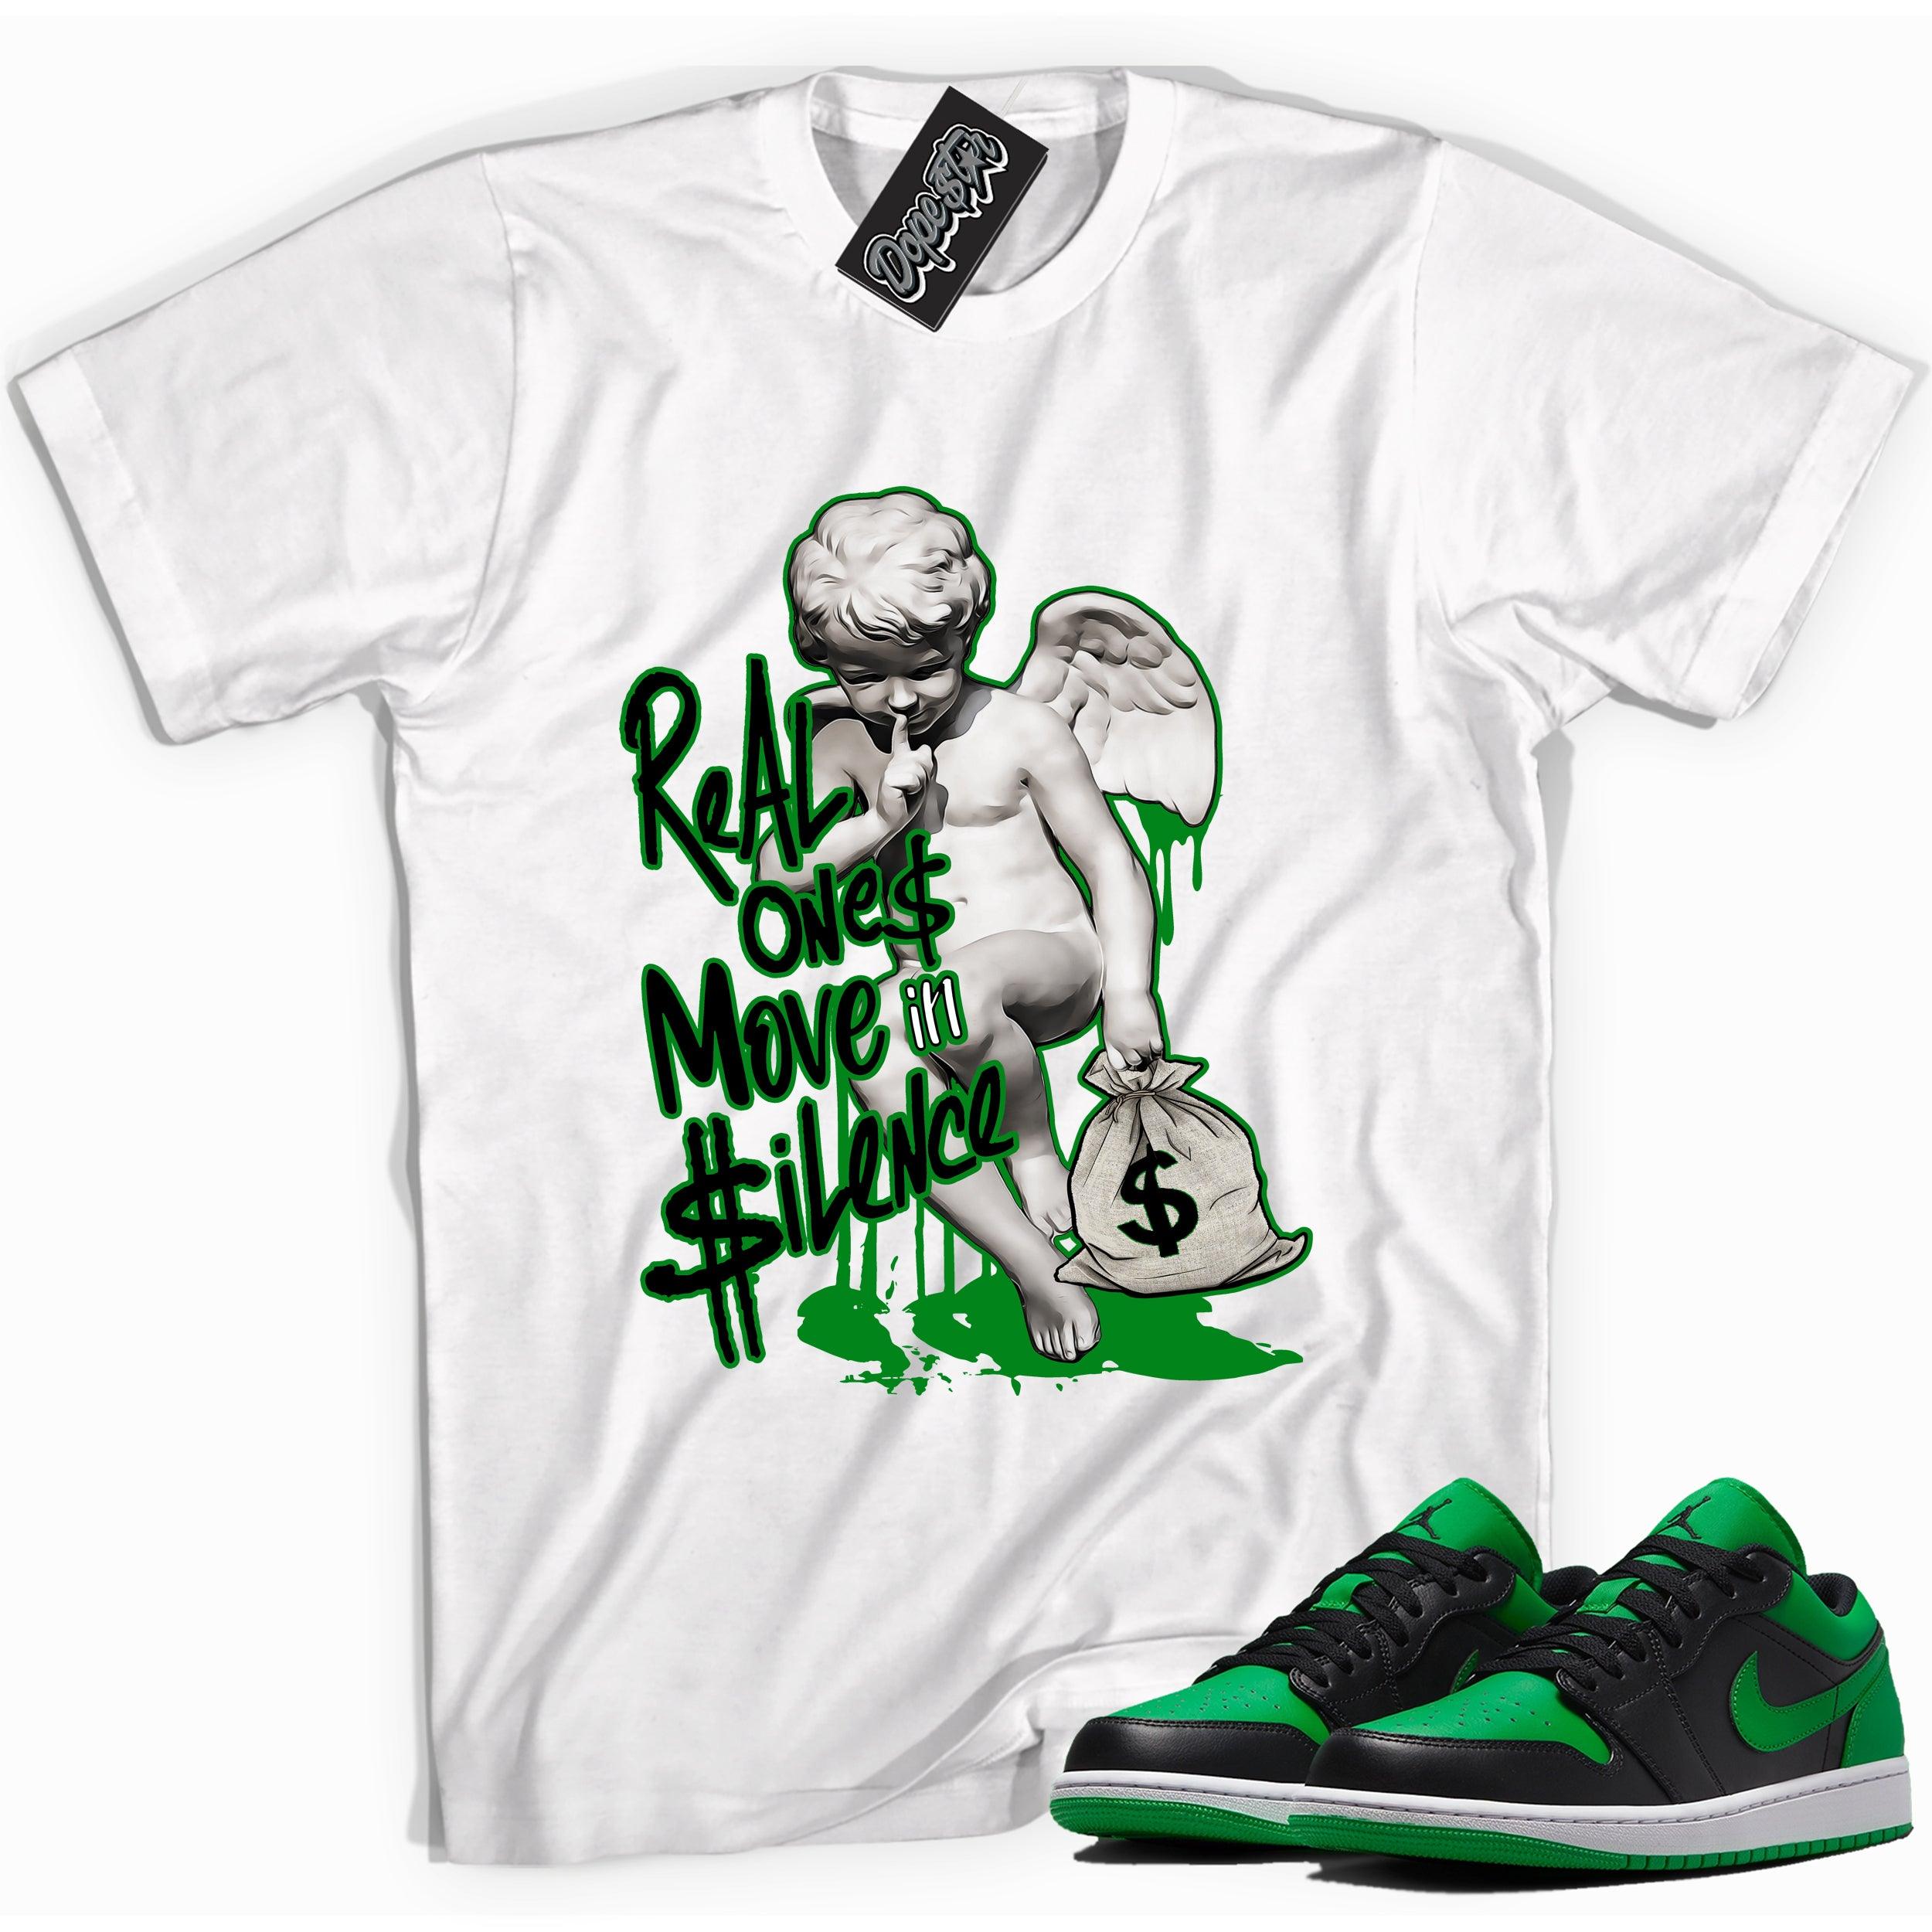 Cool white graphic tee with 'real ones in silence' print, that perfectly matches Air Jordan 1 Low Lucky Green sneakers